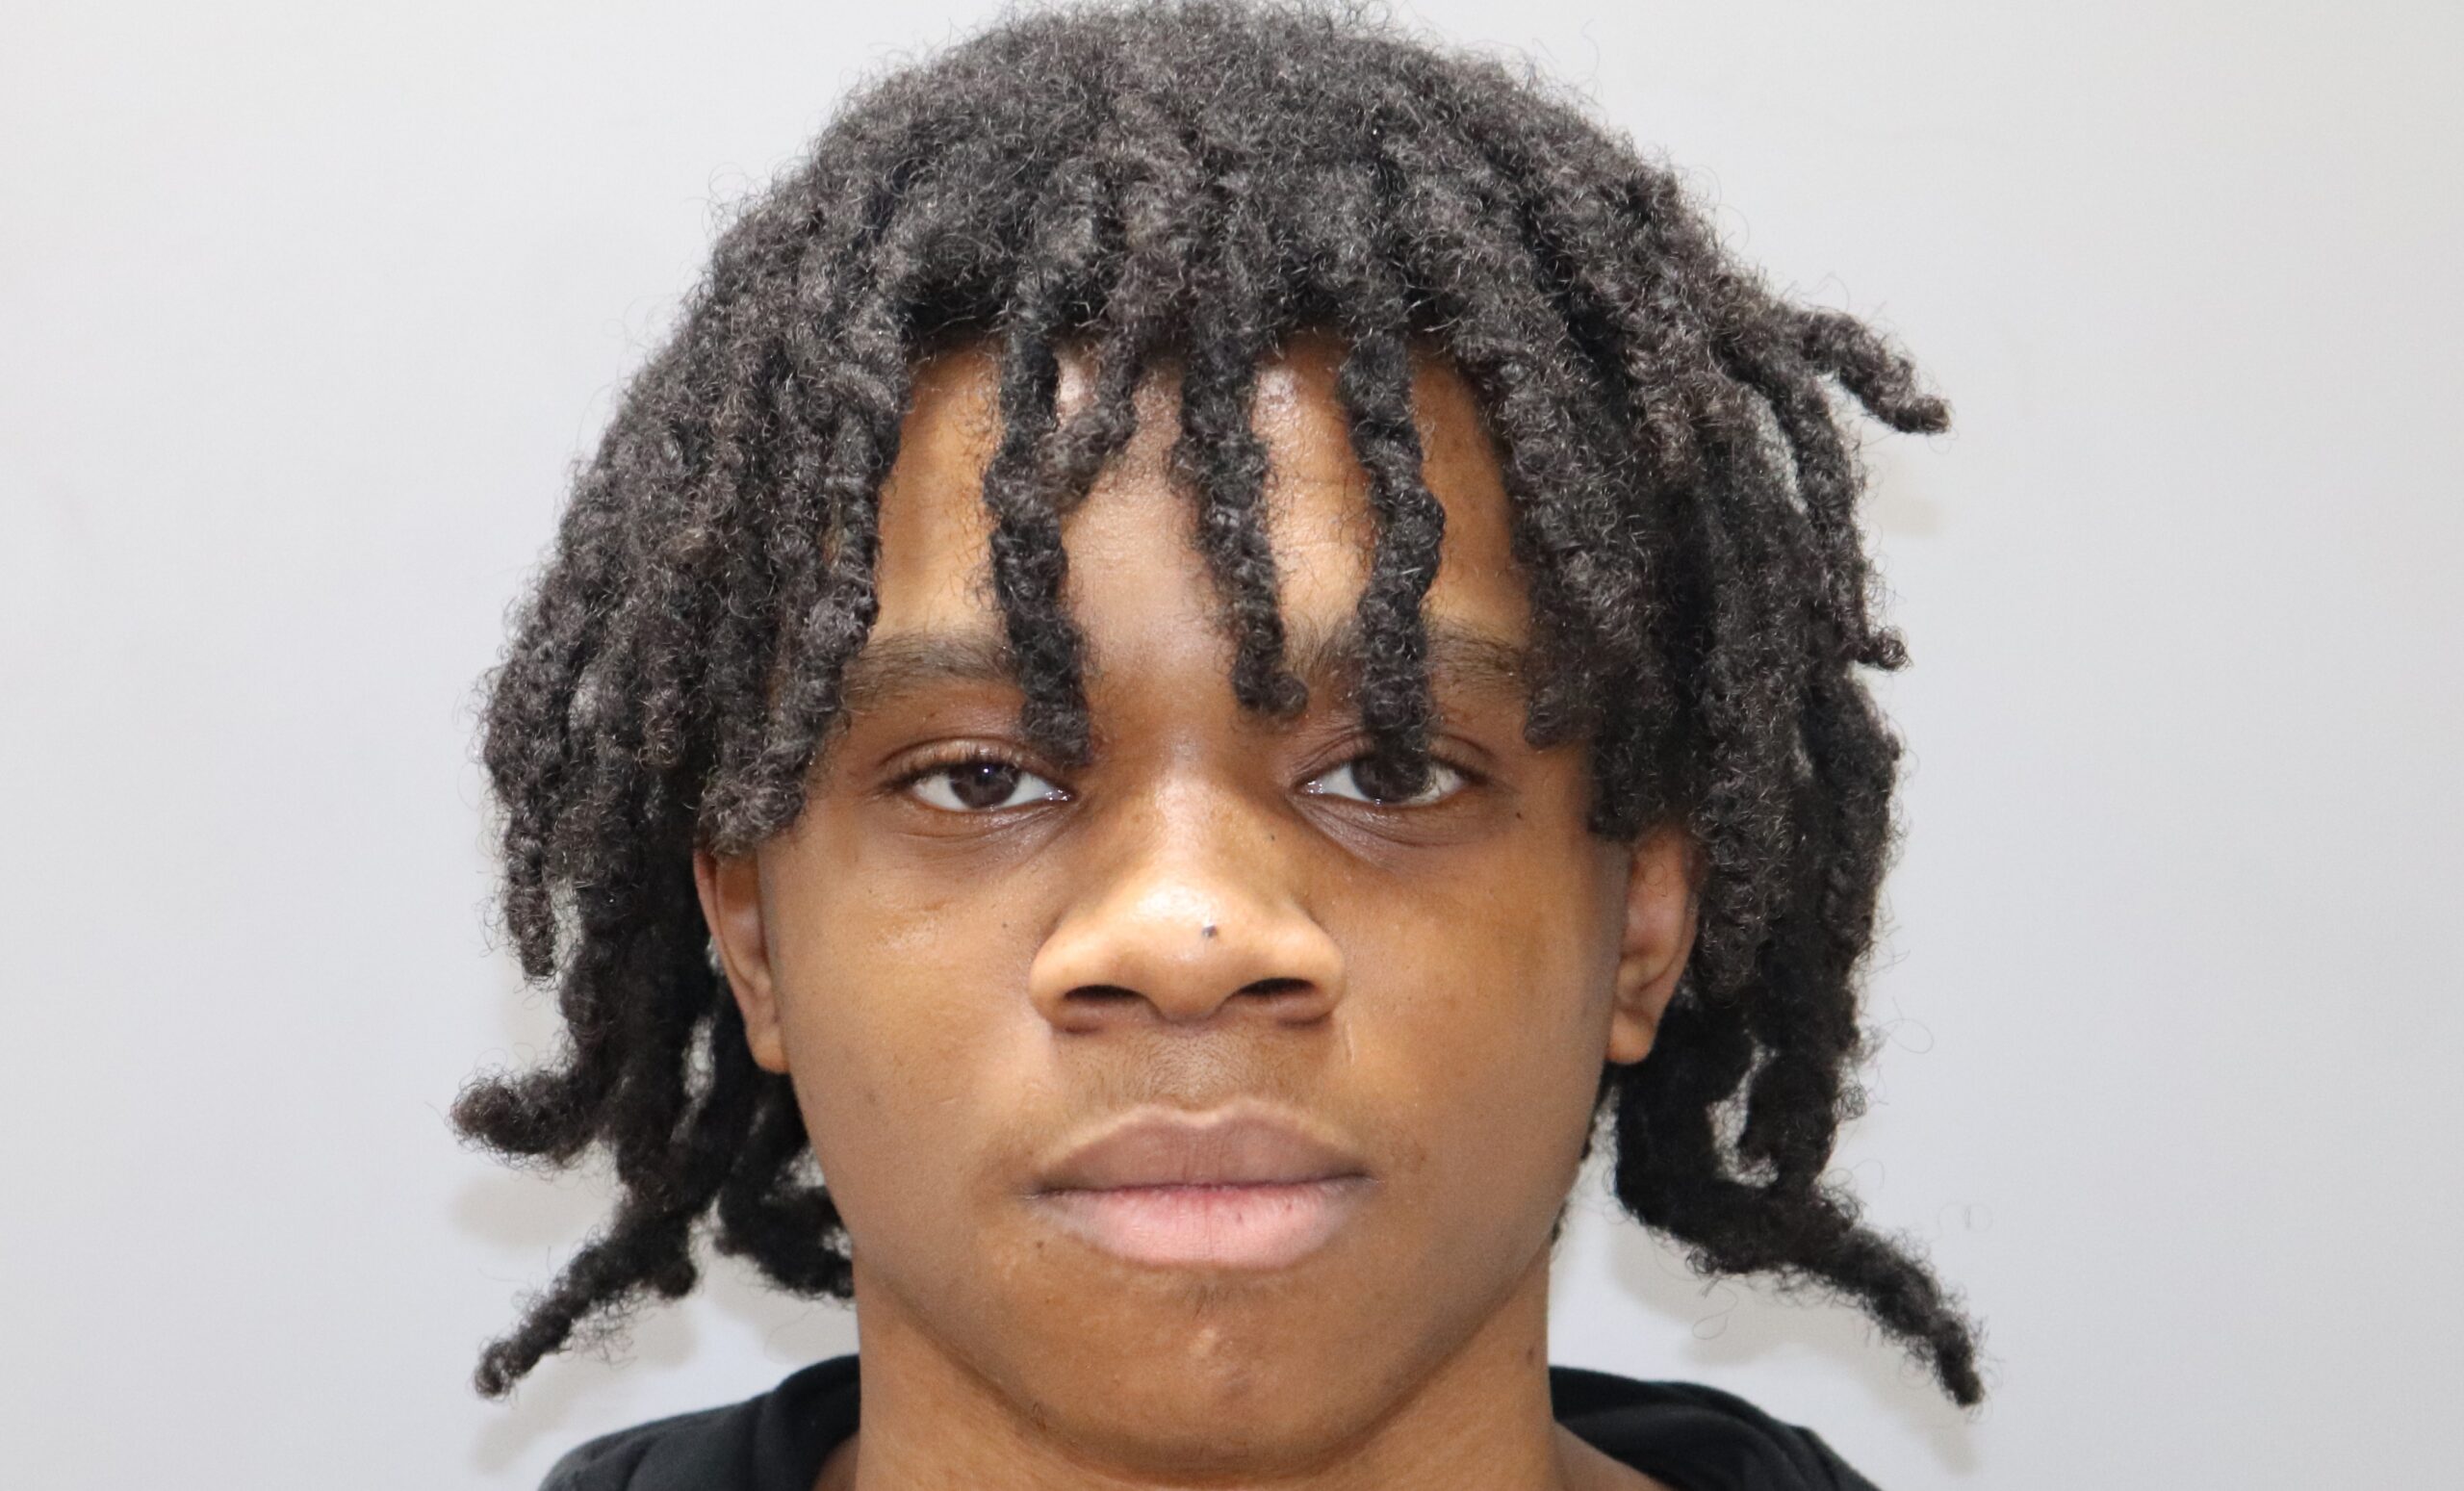 Coward Extradited From Baltimore To Face Charges In Barber Shop Armed Robbery